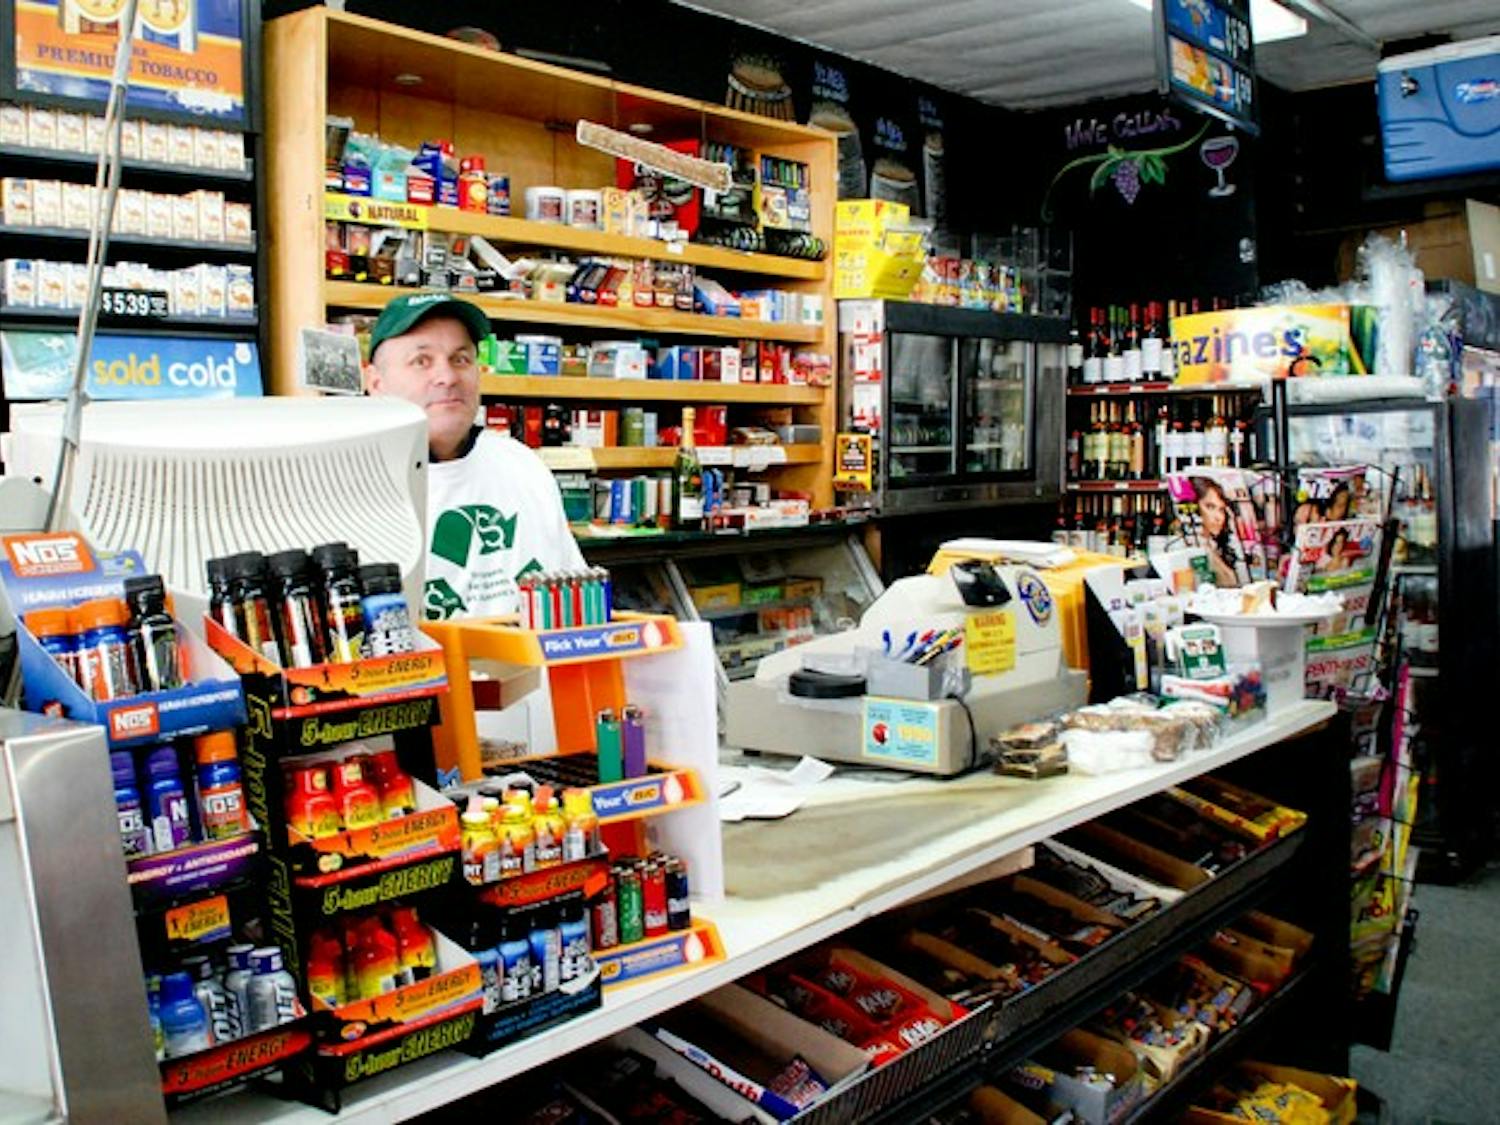 Jack Stinson, owner of Stinson's Village Store, benefits from increased alcohol sales over Homecoming weekend.